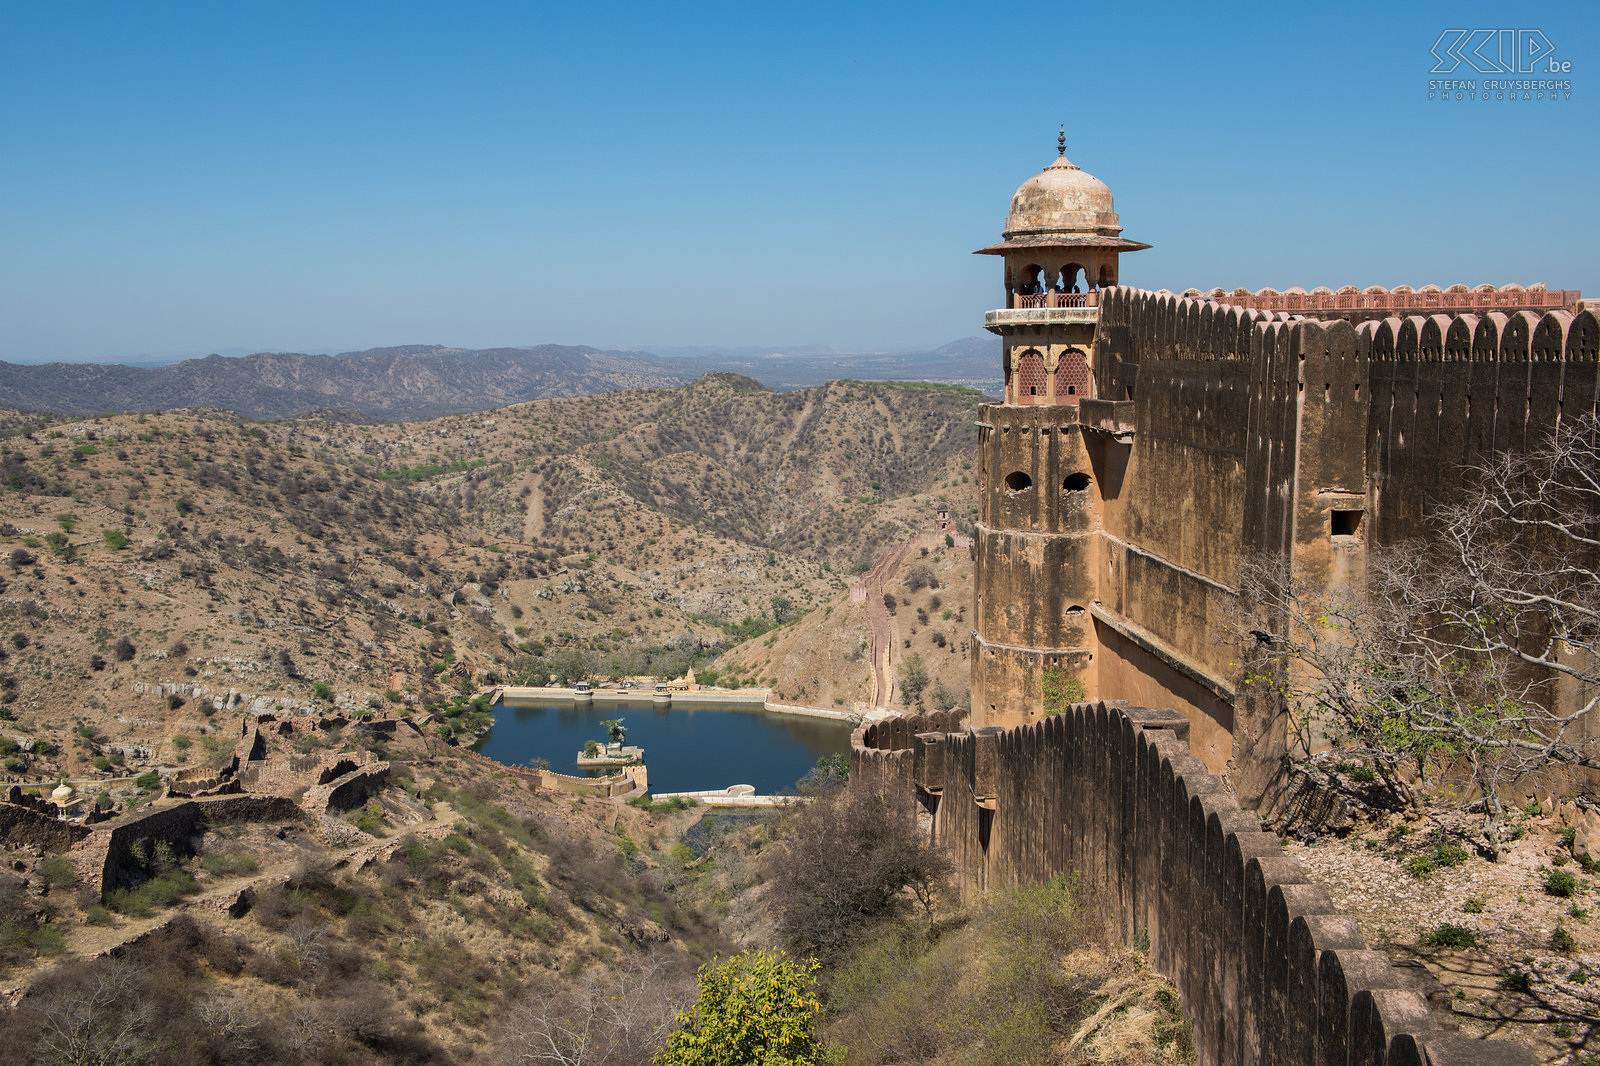 Jaipur - Jaigarh fort From the Jaigarh fort, which was built in 1720, you have a magnificent view. Jaya Vana is the name of the oldest antique gun Indies Stefan Cruysberghs